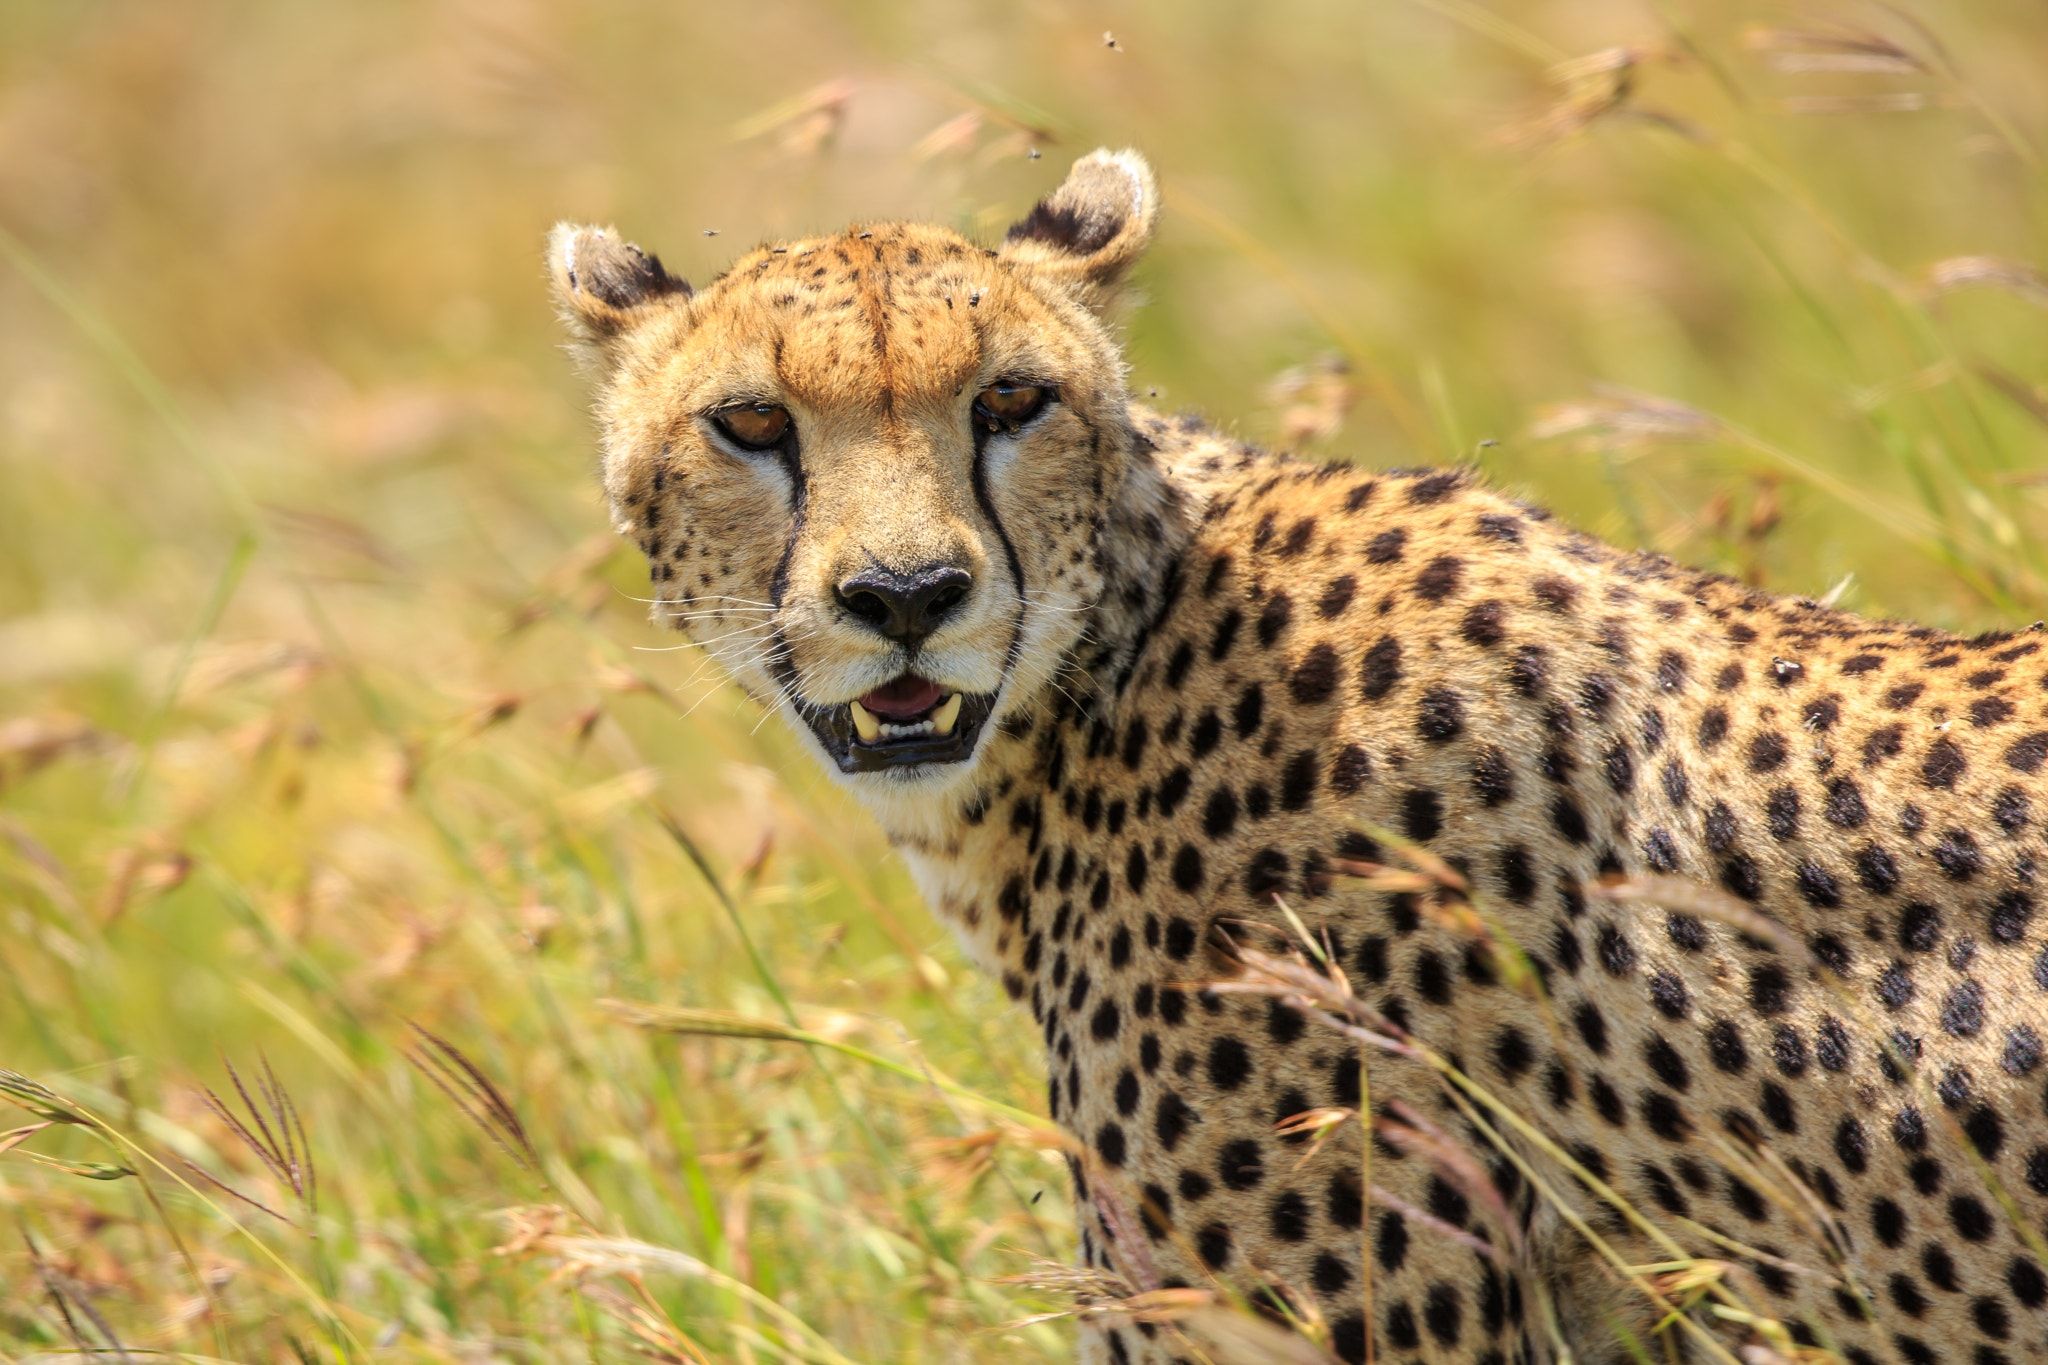 Up close to a wild Cheetah - I had the priviledge of capturing this ...